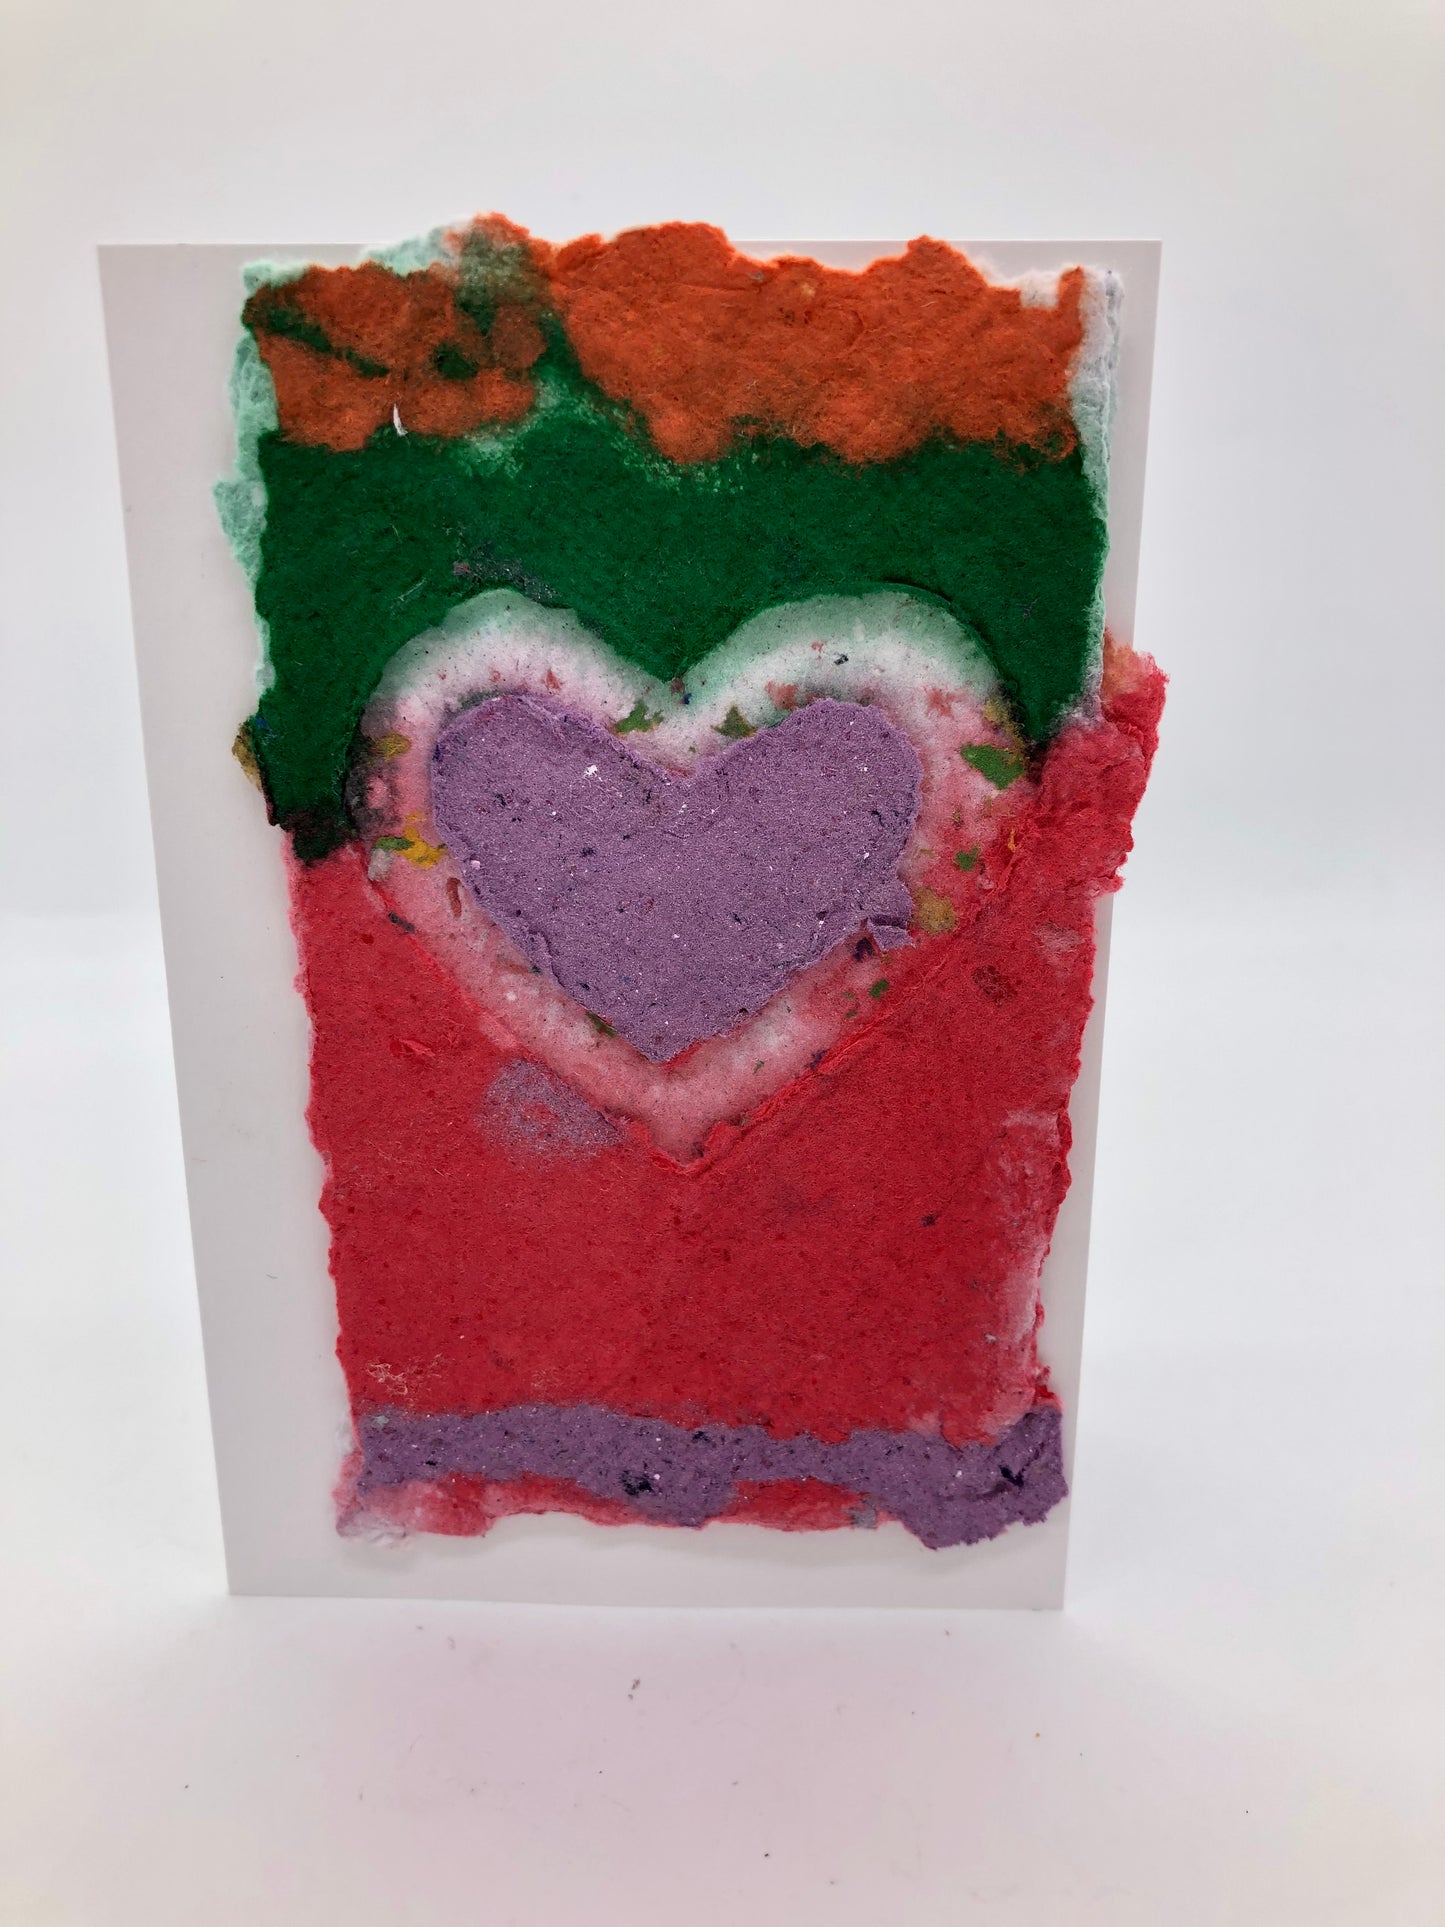 Handmade paper greeting card with a white outline heart.  Inside the heart is lavender.  The background has horizontal stripes of color with orange at the top, then dark green, red from center to the bottow with a think purple stripe at bottom.  